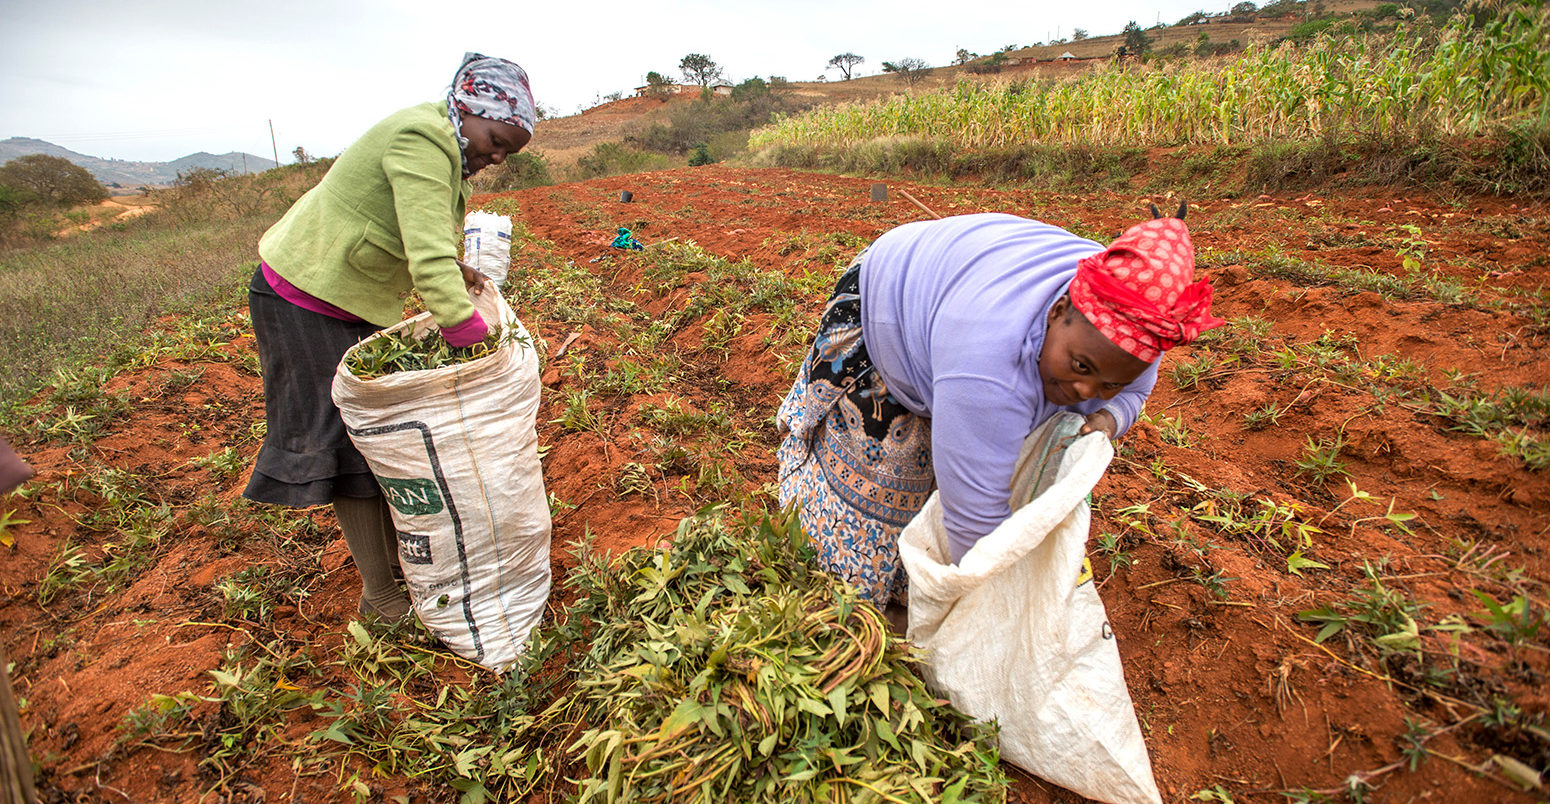 African women harvesting yam plants in the Hhohho region of Swaziland, Africa.